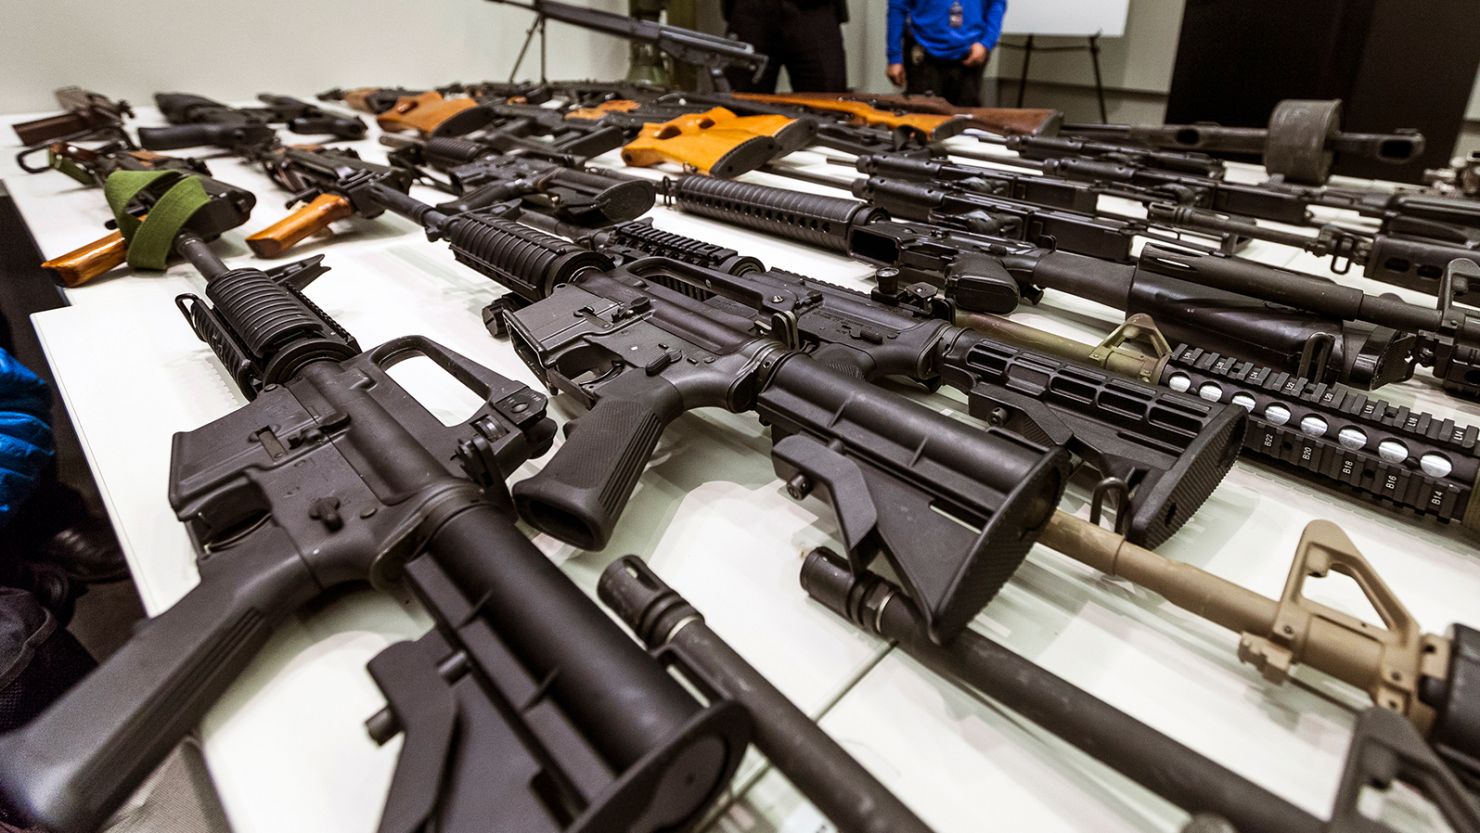 A variety of military-style semi-automatic rifles obtained during a buy-back program are displayed at Los Angeles police headquarters.